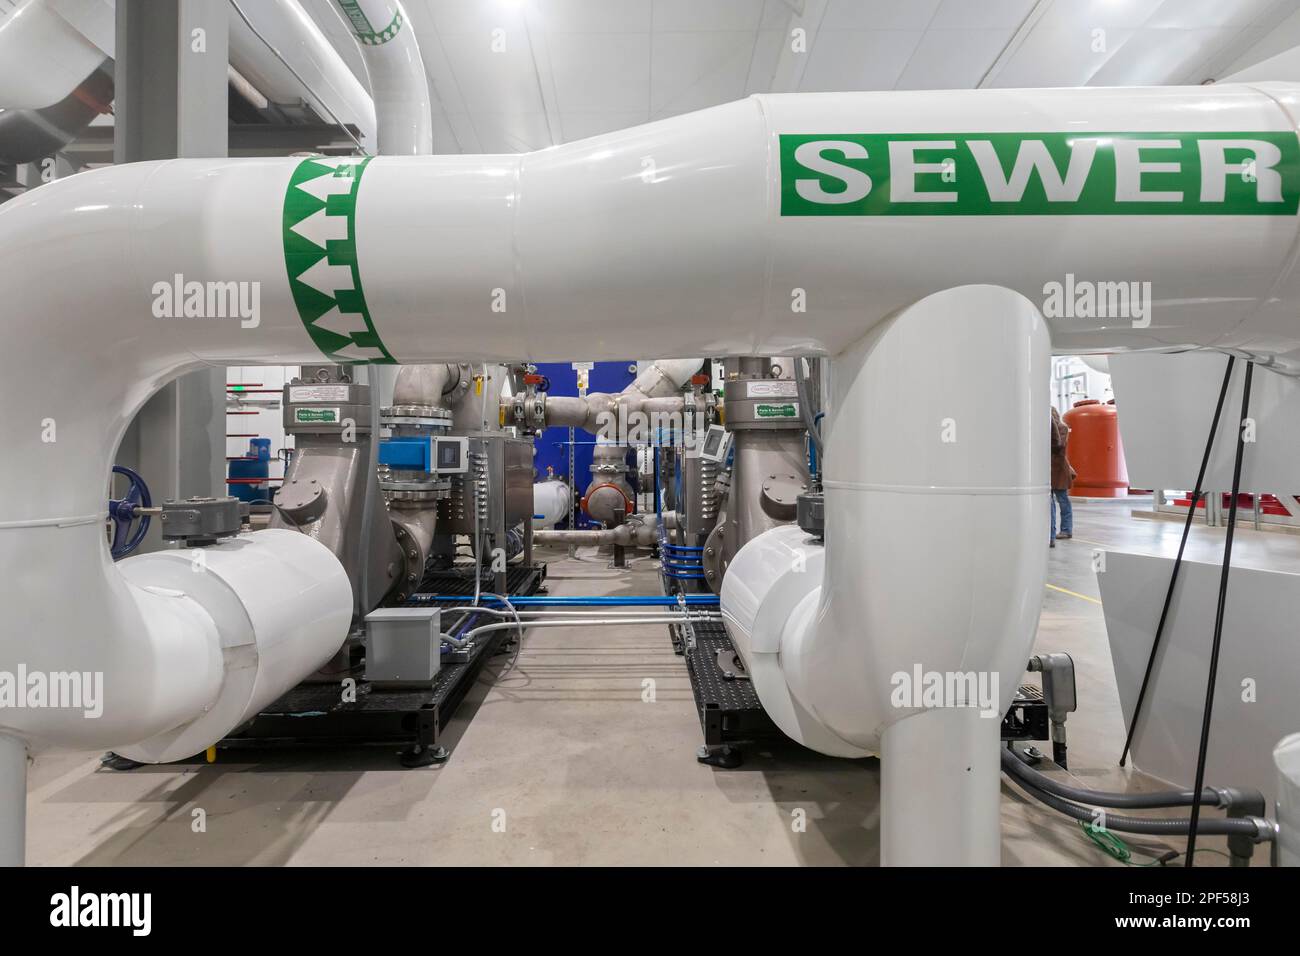 Denver, Colorado, Raw sewage is used to heat and cool buildings at the National Western Center and the Colorado State University Spur campus. The Stock Photo